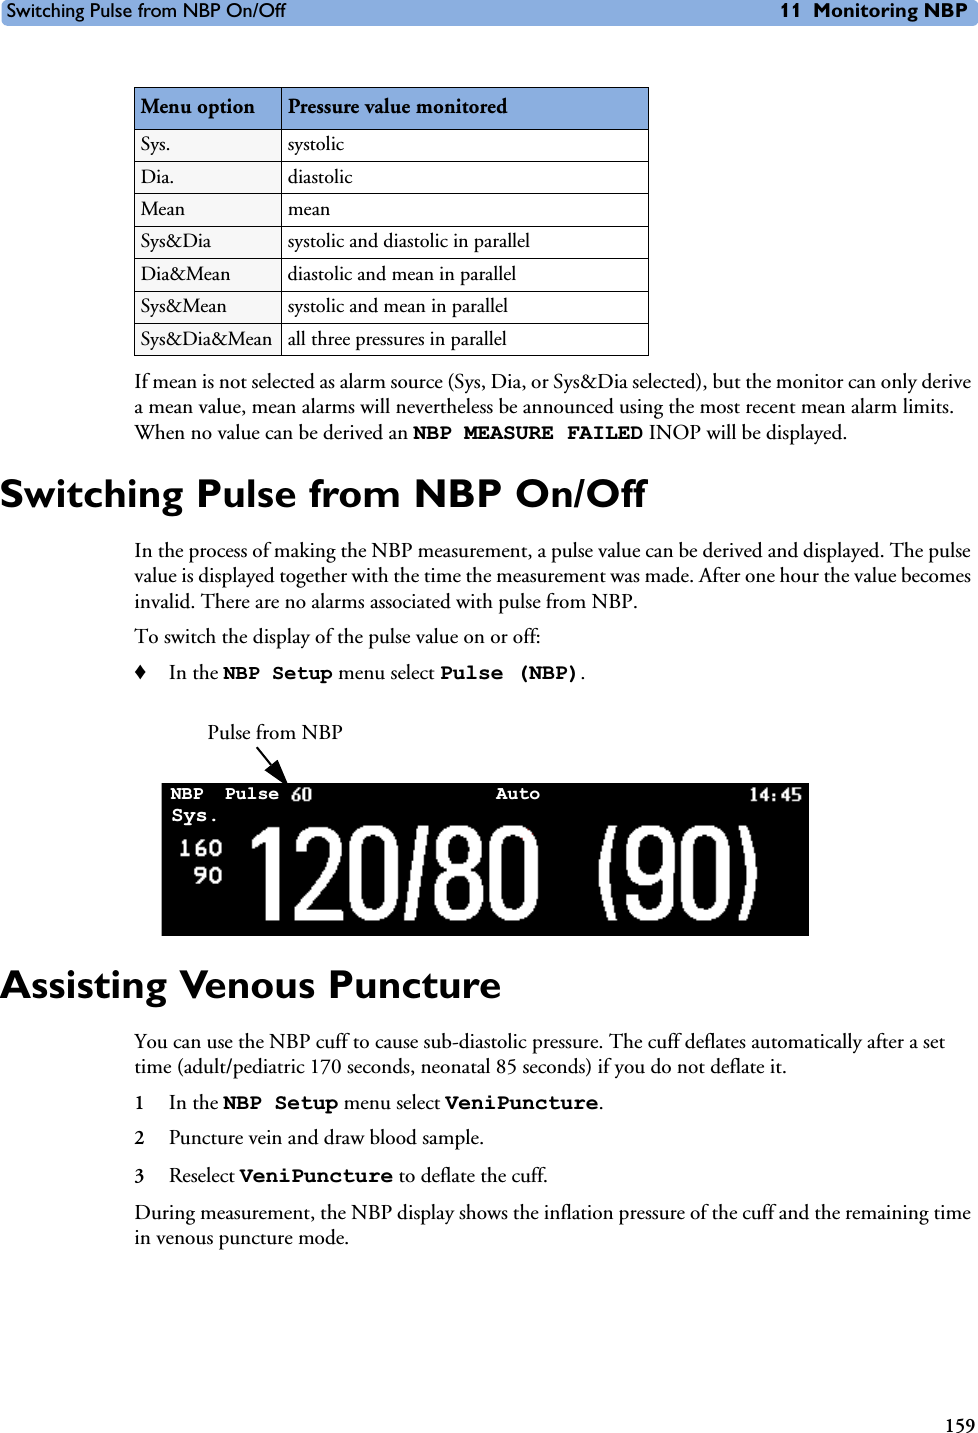 Switching Pulse from NBP On/Off 11 Monitoring NBP159If mean is not selected as alarm source (Sys, Dia, or Sys&amp;Dia selected), but the monitor can only derive a mean value, mean alarms will nevertheless be announced using the most recent mean alarm limits. When no value can be derived an NBP MEASURE FAILED INOP will be displayed.Switching Pulse from NBP On/OffIn the process of making the NBP measurement, a pulse value can be derived and displayed. The pulse value is displayed together with the time the measurement was made. After one hour the value becomes invalid. There are no alarms associated with pulse from NBP. To switch the display of the pulse value on or off:♦In the NBP Setup menu select Pulse (NBP).Assisting Venous PunctureYou can use the NBP cuff to cause sub-diastolic pressure. The cuff deflates automatically after a set time (adult/pediatric 170 seconds, neonatal 85 seconds) if you do not deflate it.1In the NBP Setup menu select VeniPuncture.2Puncture vein and draw blood sample.3Reselect VeniPuncture to deflate the cuff. During measurement, the NBP display shows the inflation pressure of the cuff and the remaining time in venous puncture mode.Menu option Pressure value monitoredSys. systolic Dia. diastolic Mean mean Sys&amp;Dia systolic and diastolic in parallelDia&amp;Mean diastolic and mean in parallelSys&amp;Mean systolic and mean in parallelSys&amp;Dia&amp;Mean all three pressures in parallelPulse from NBPNBP AutoSys.Pulse